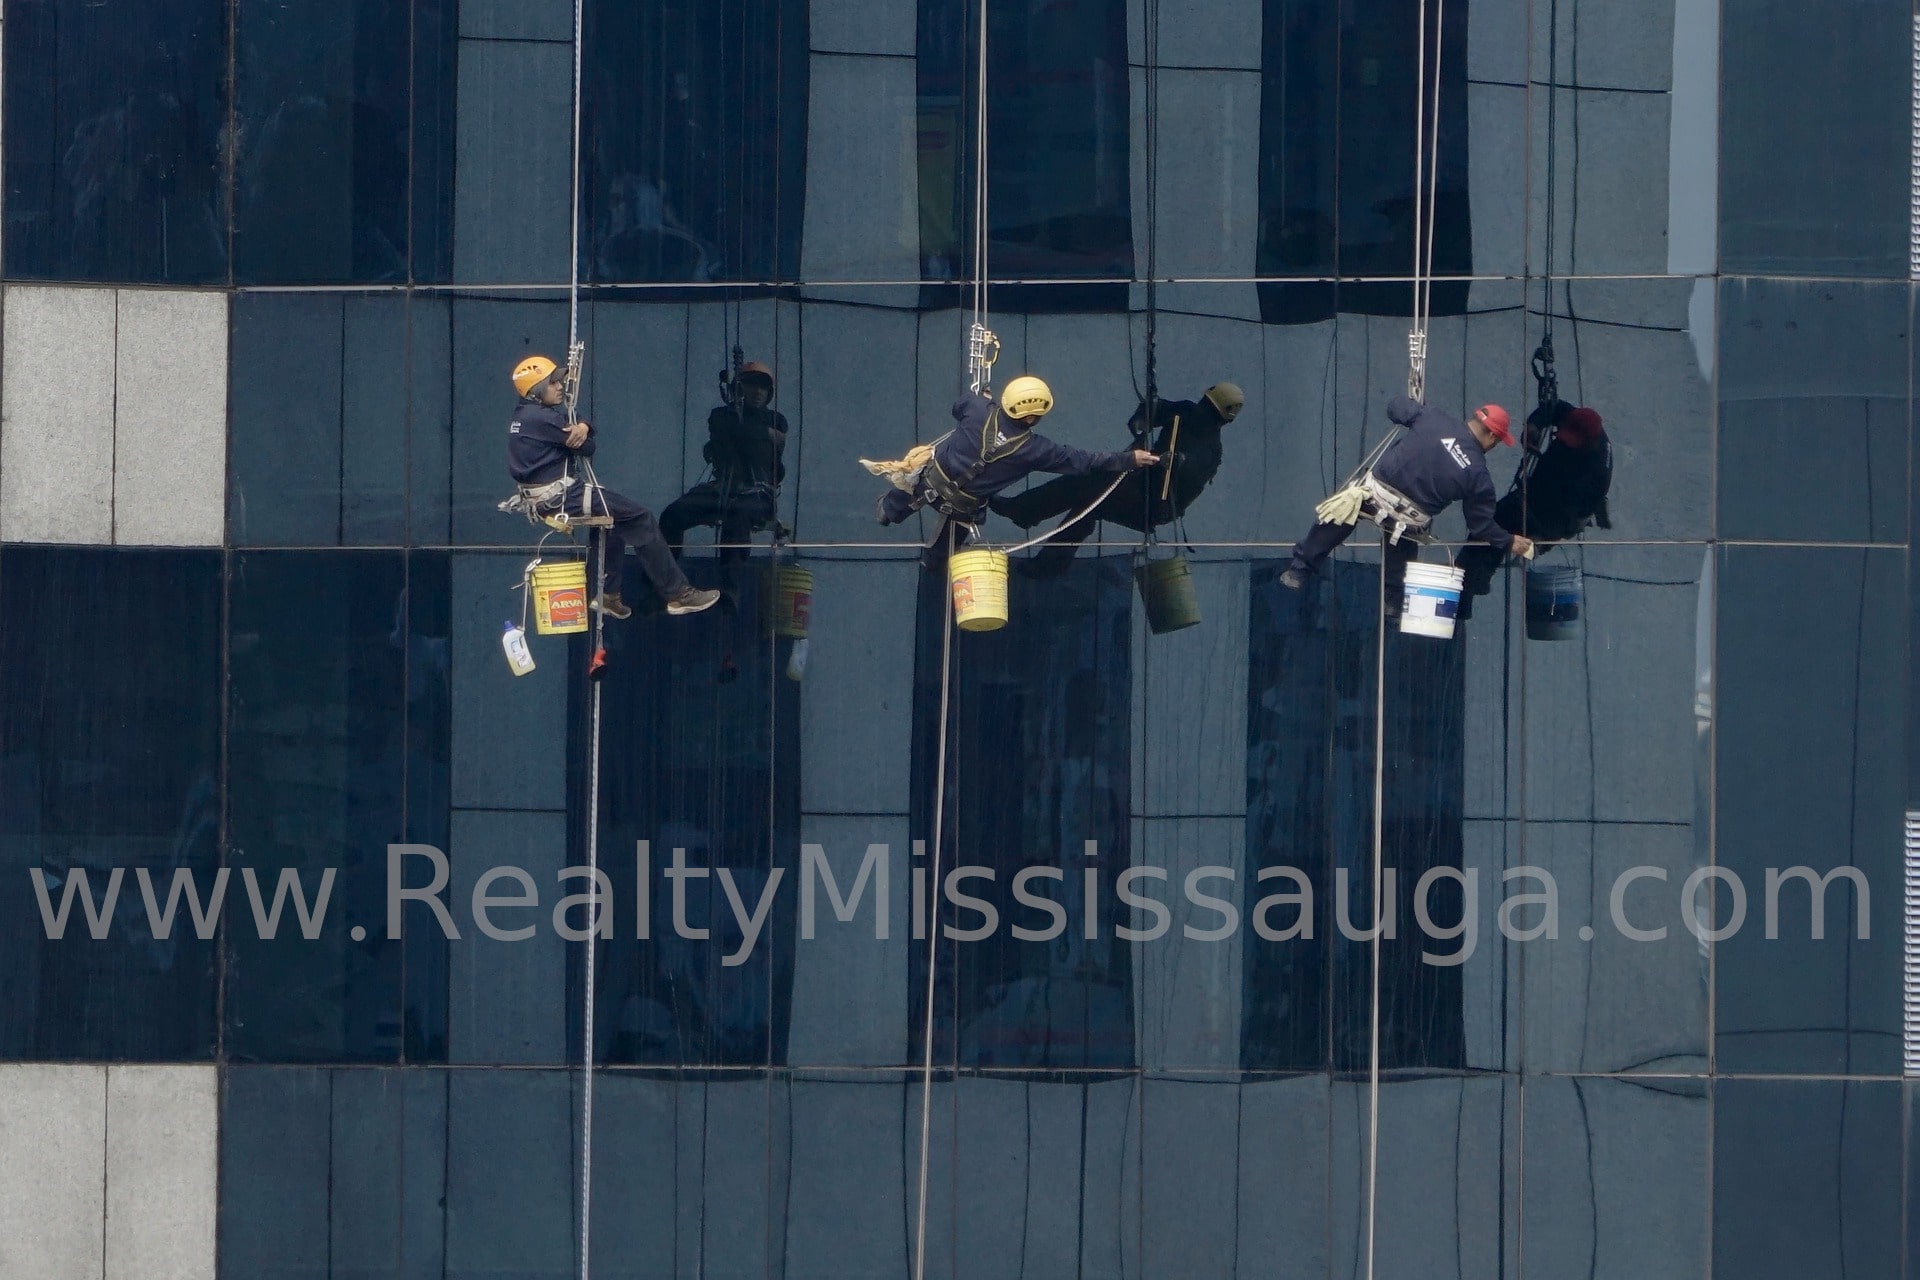 You are currently viewing How do you find lowers/window cleaning services in Mississauga?